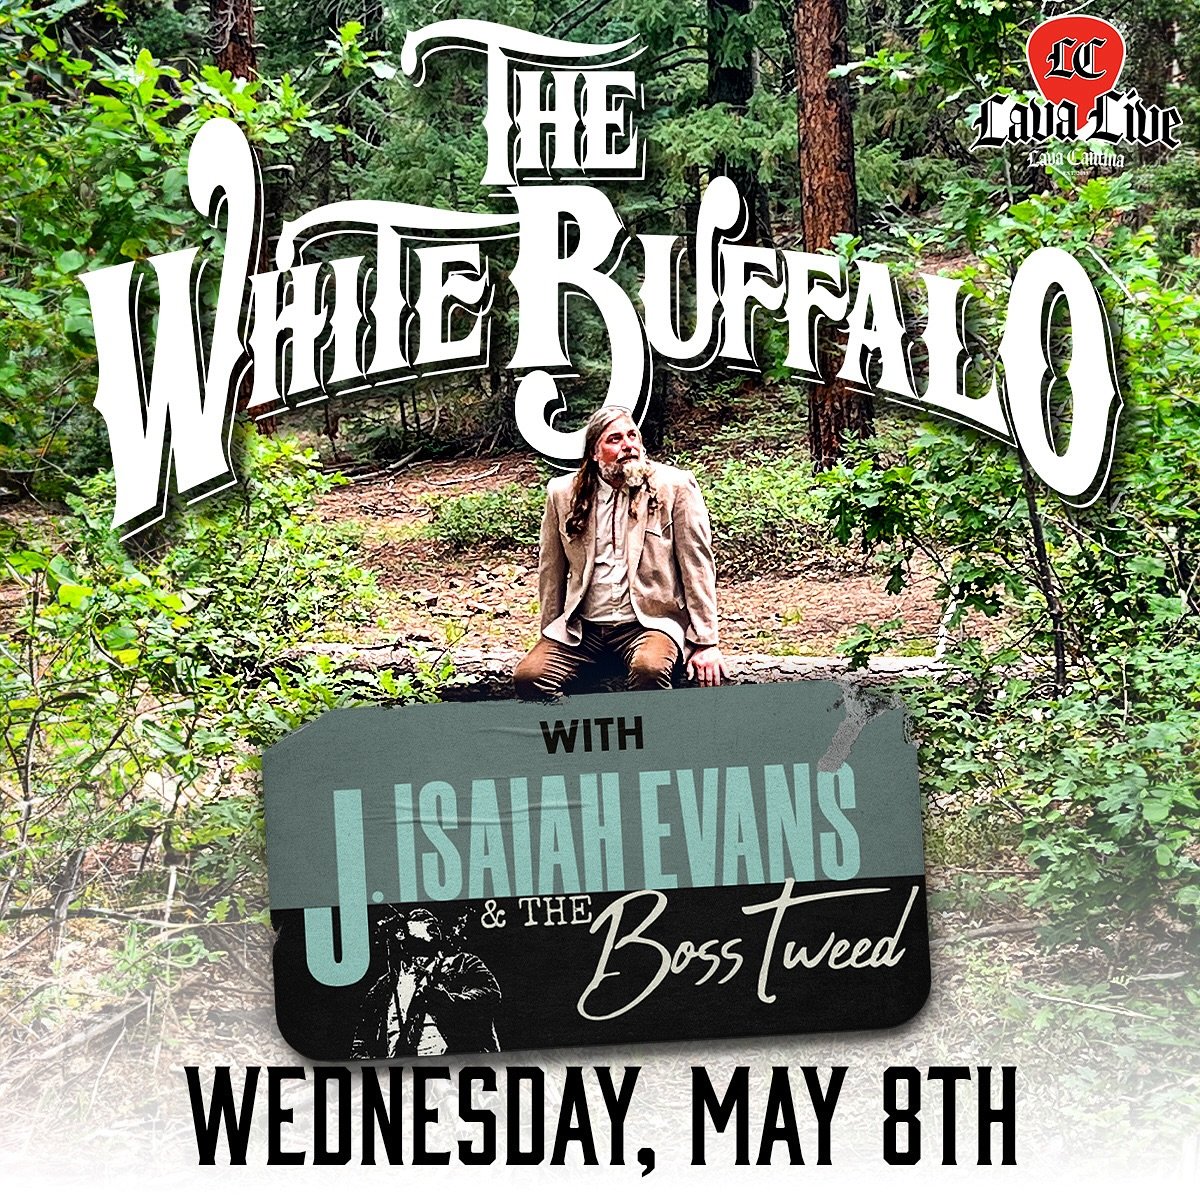 🔥The White Buffalo @lavacantinatc - Wednesday, May 8th starting at 7pm with J. Isaiah Evans &amp; The Boss Tweed!🔥

🎟️🎟️➡️ LavaCantina.com

👀General Admission for this show is CHARGED. Reserved seating on our VIP Patio and Balcony is available f